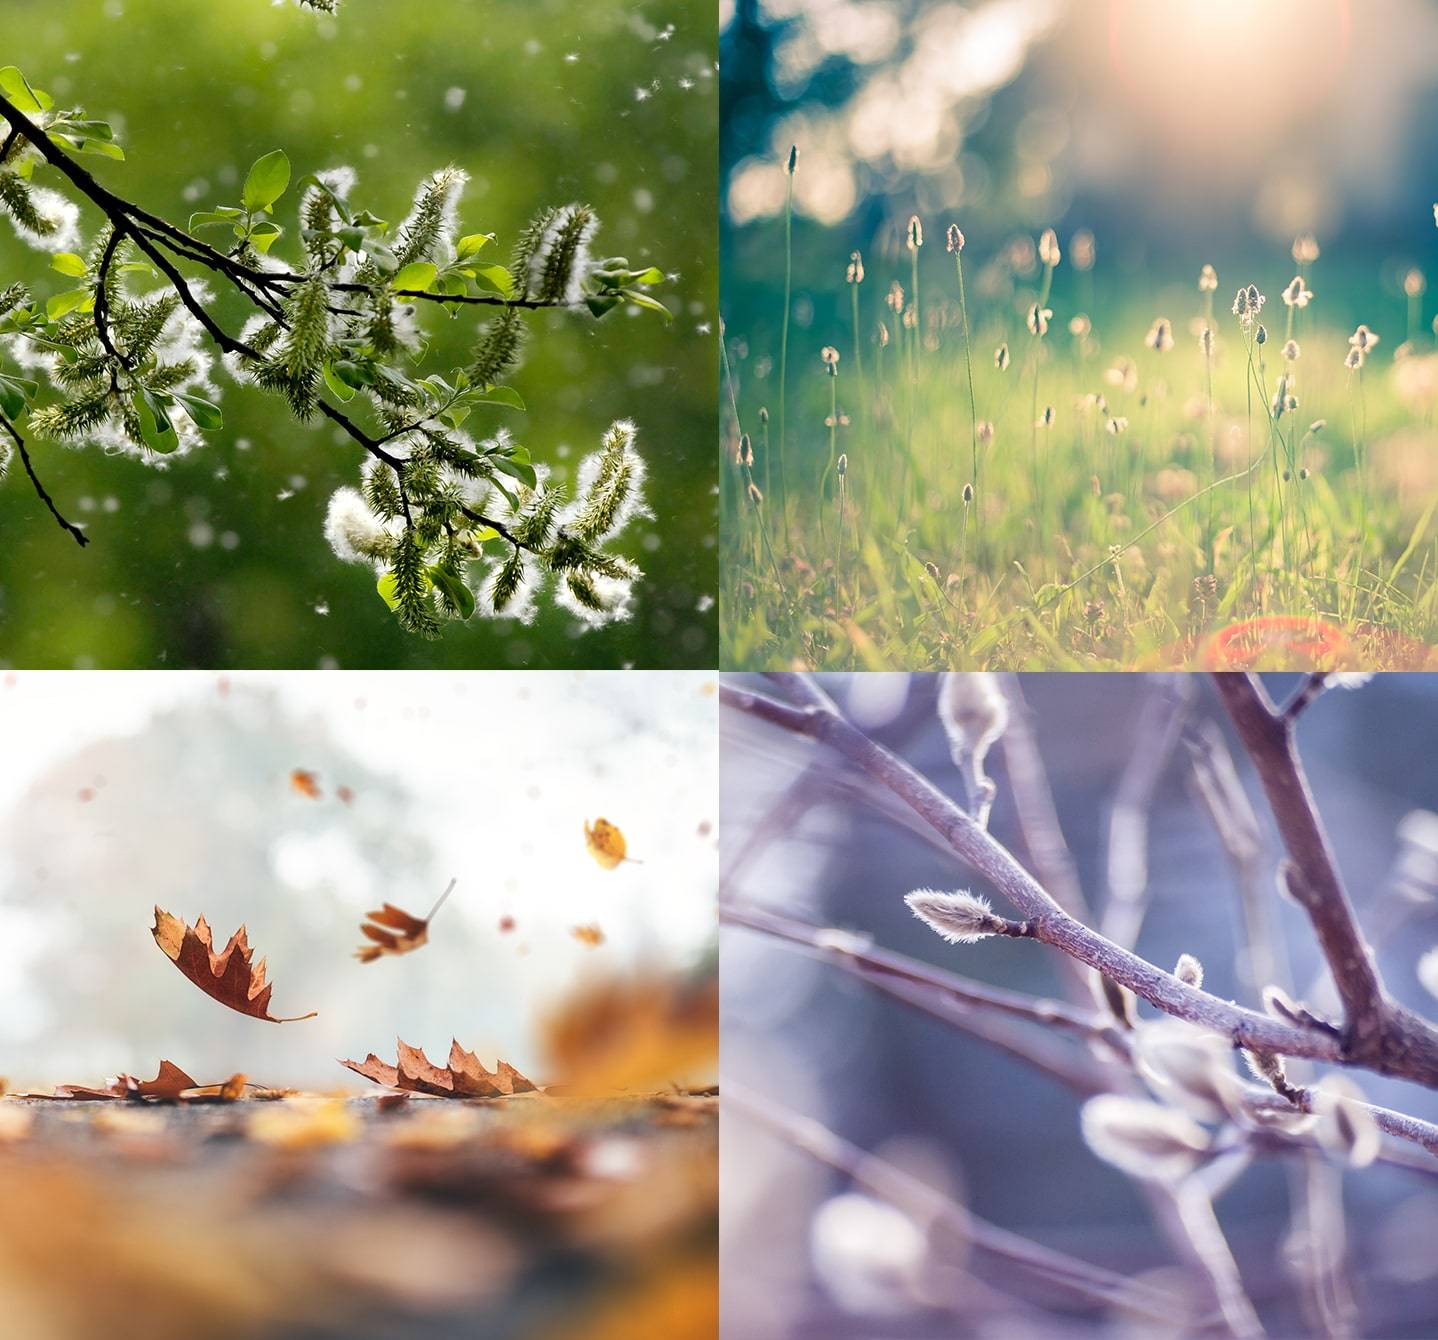 Symptoms of seasonal allergies may flare up in the spring, summer or autumn but not generally in winter